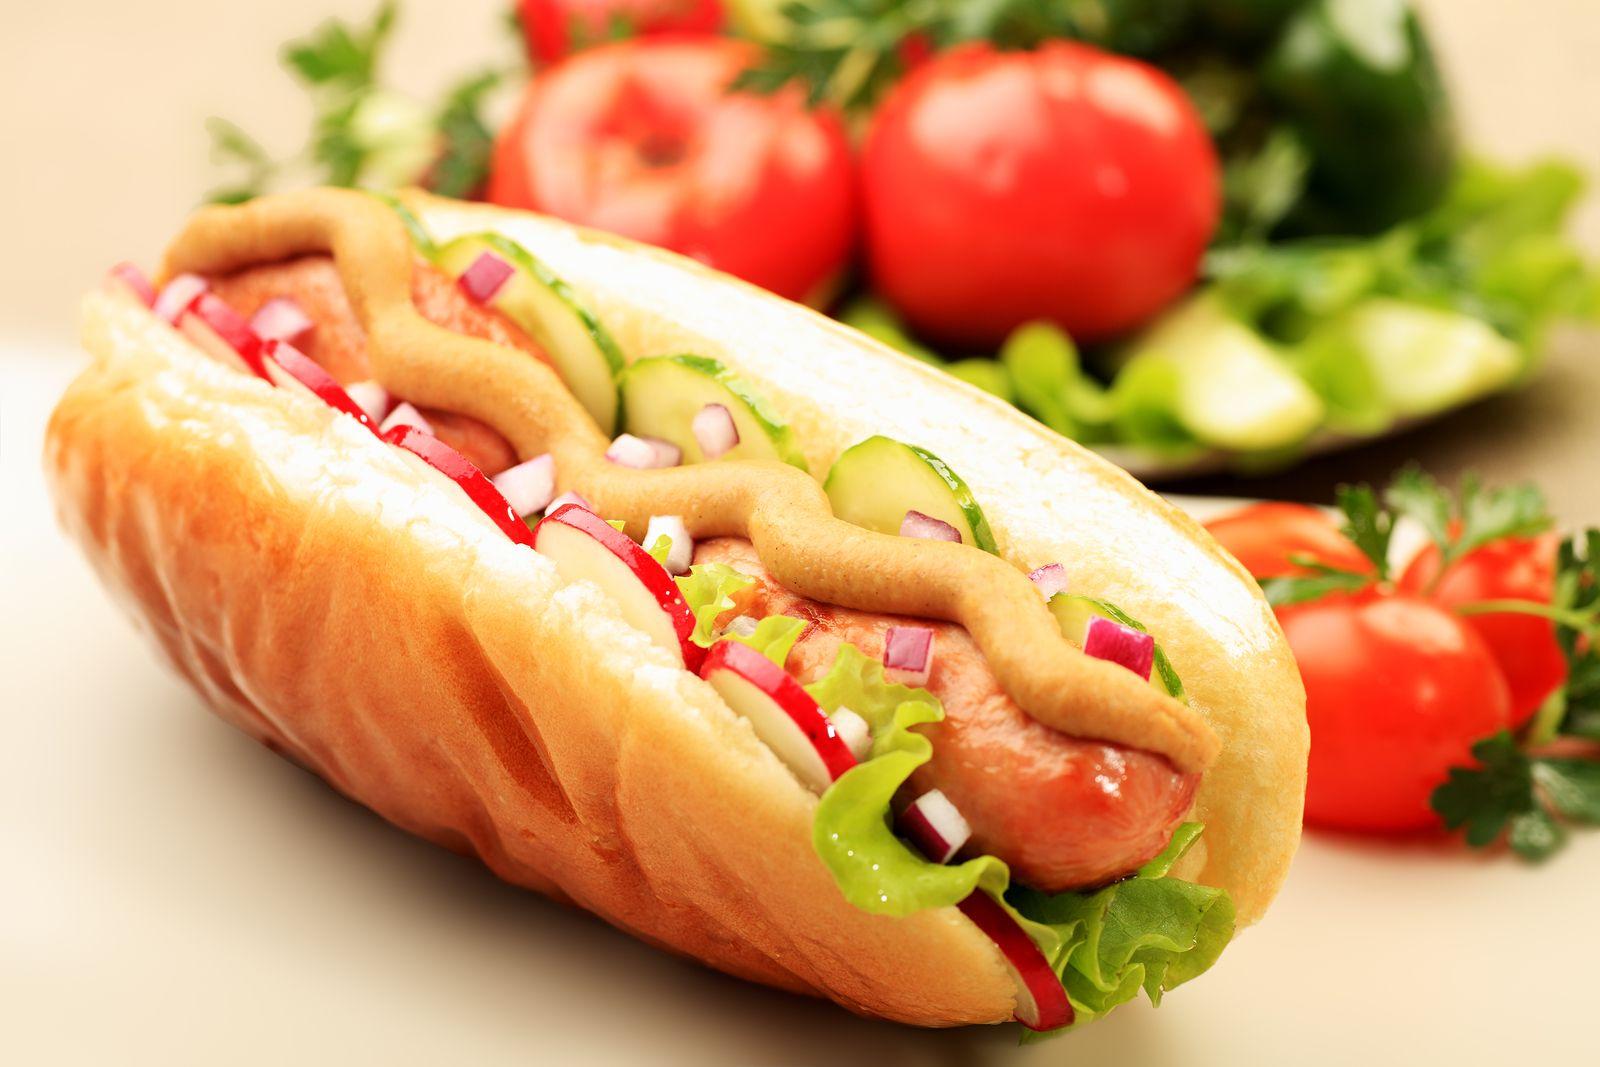 Hot Dog Wallpapers Top Free Hot Dog Backgrounds Wallpaperaccess Images, Photos, Reviews